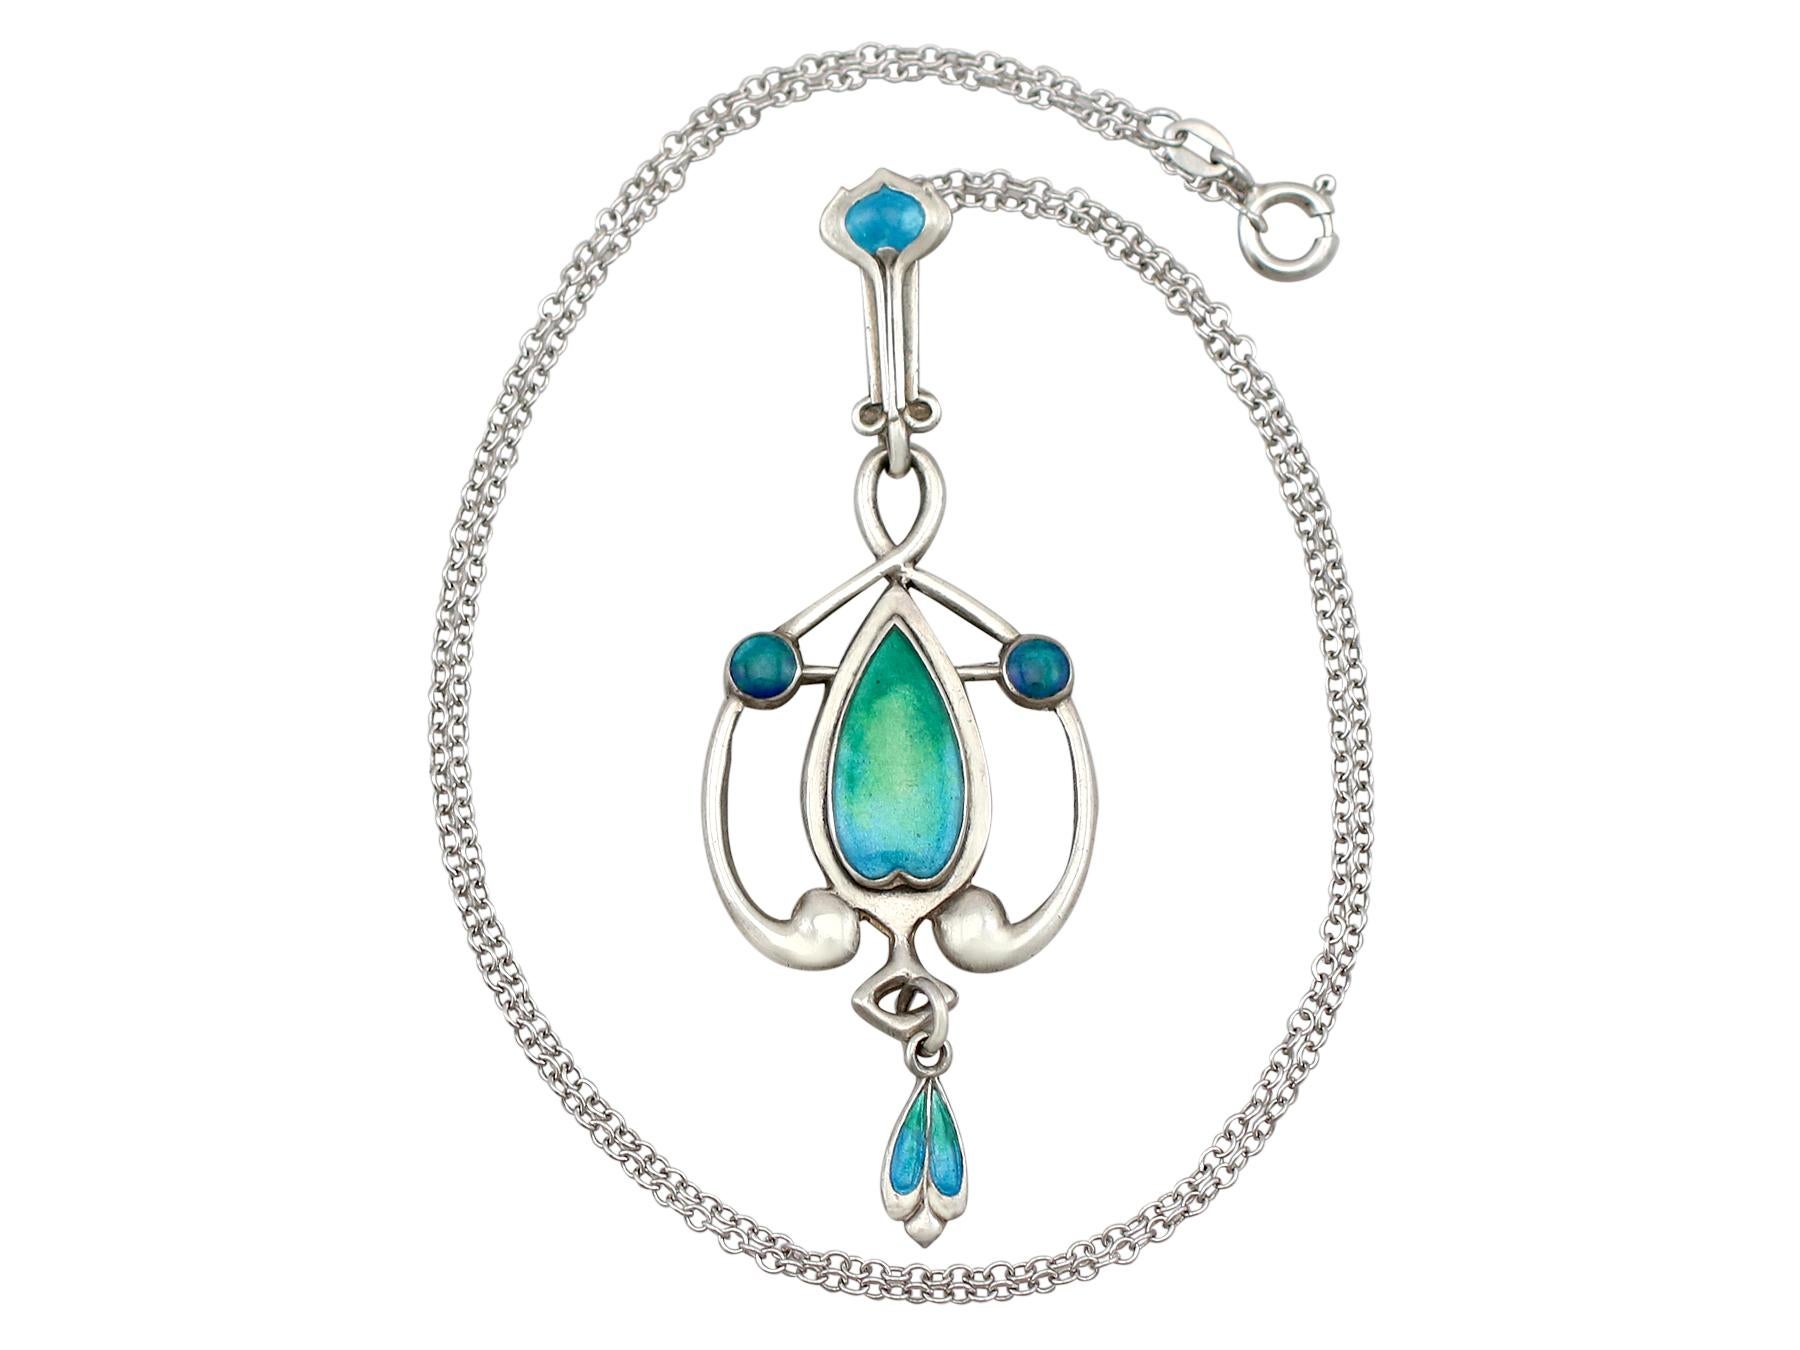 An impressive antique Art Nouveau sterling silver and enamel pendant and chain; part of our diverse antique jewellery and estate jewelry collections.

This fine and impressive Art Nouveau pendant has been crafted in sterling silver.

The pendant has